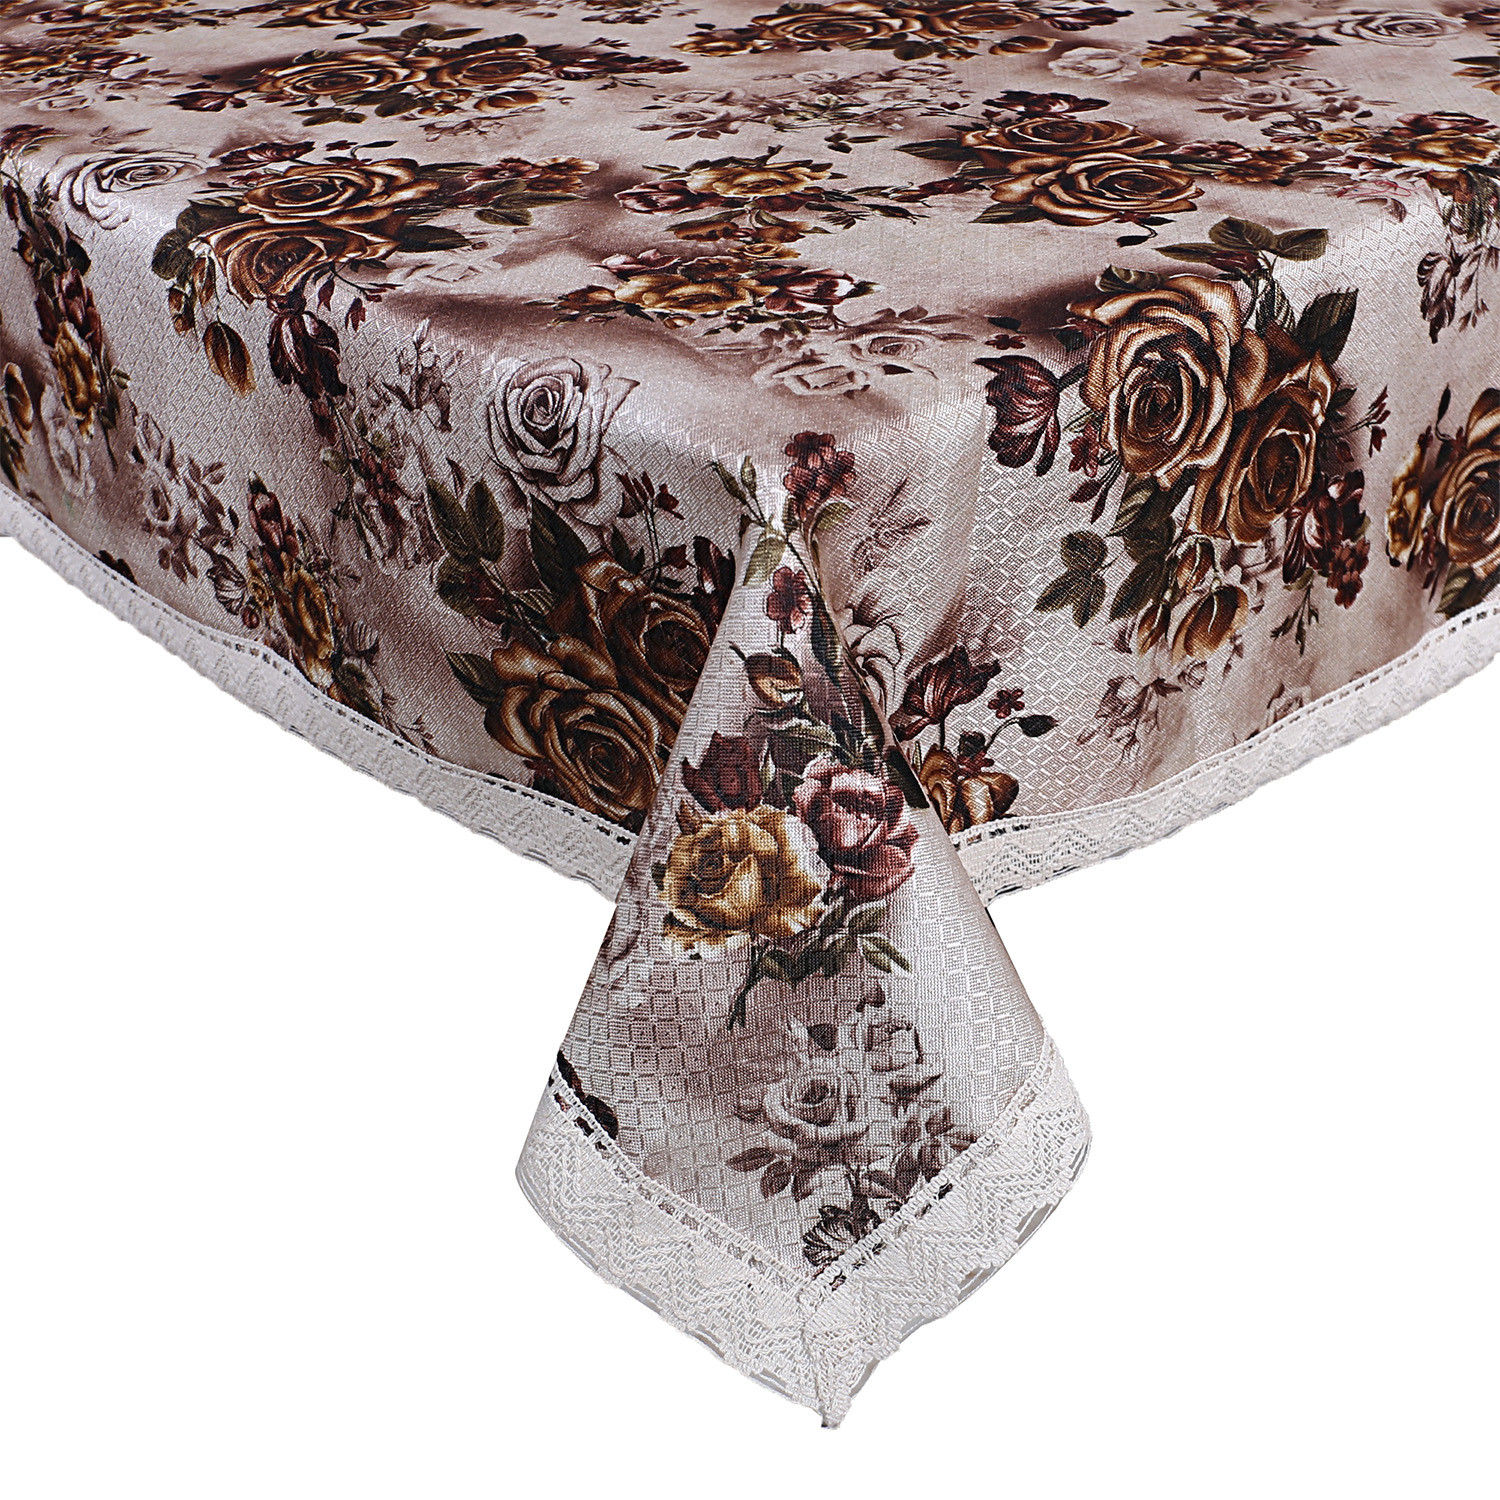 Kuber Industries Dining Table Cover|Faux Silk Spill Proof Gold Rose Pattern Tablecloth|Kitchen Dinning Protector With Jutelace Border, 60X90 Inch (Gold)